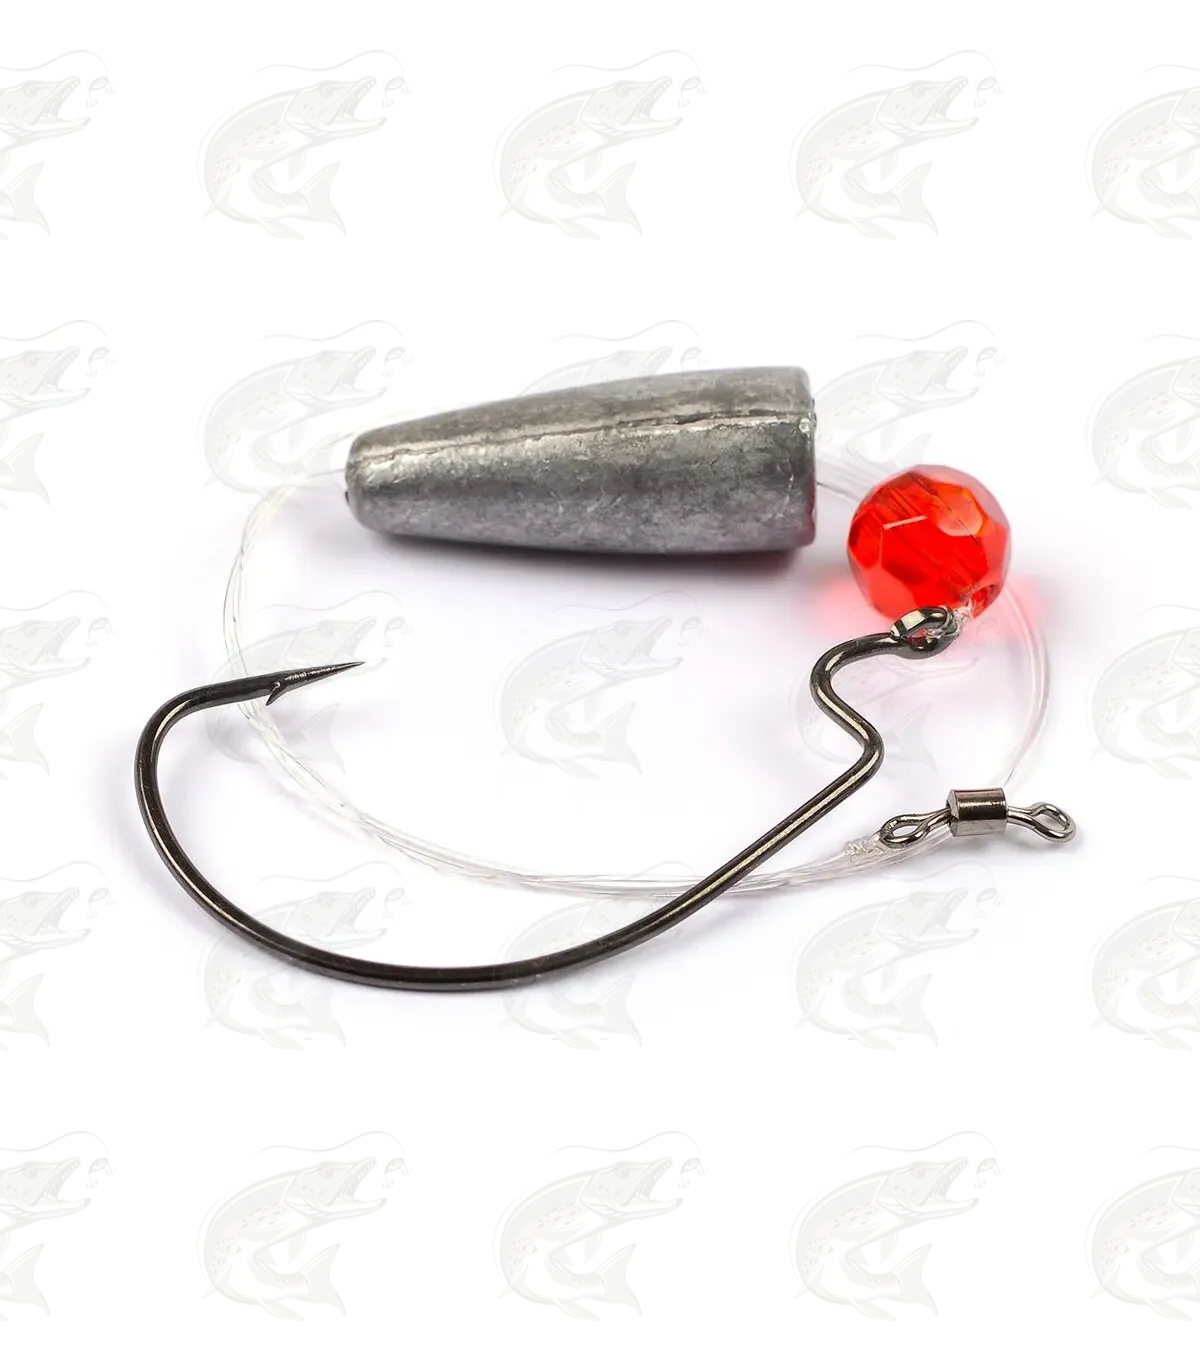 Bullets Fishing Sinker Worm Weight Sinker Kit Lead Weight Fishing  Accessories For Saltwater Fishing From 10,26 €